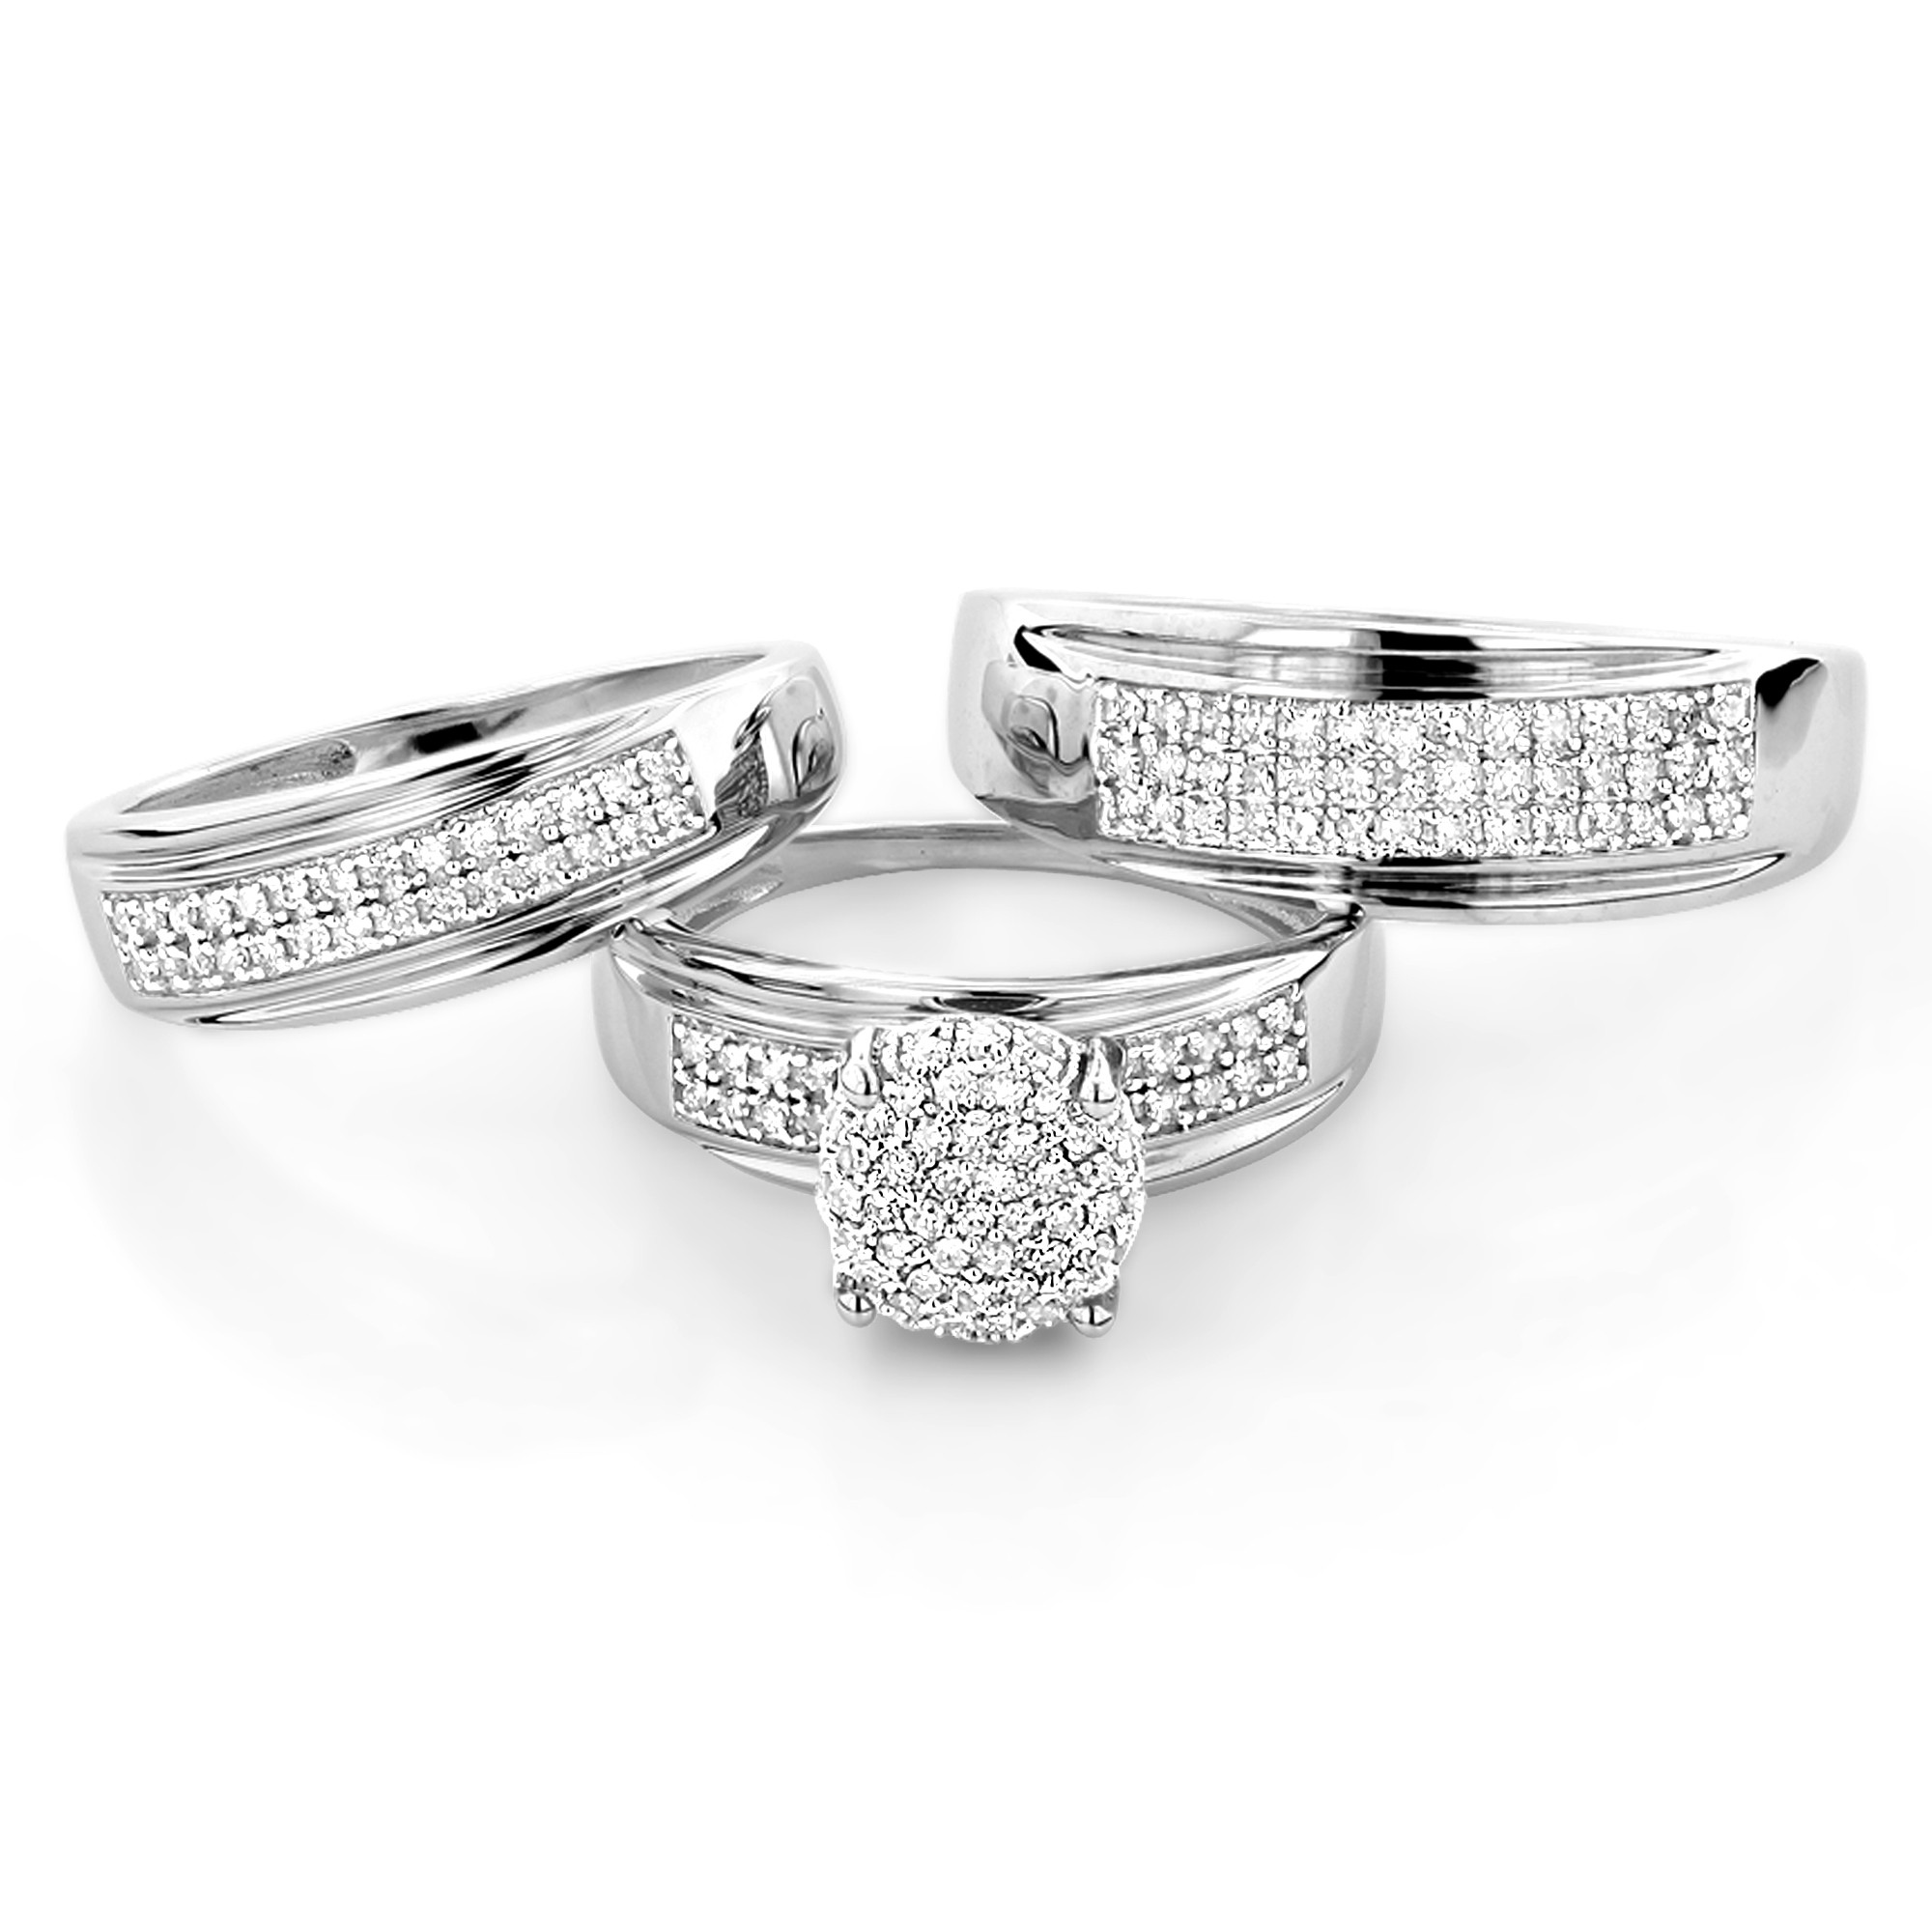 Wedding Ring Sets His And Hers
 10K Gold Engagement Trio Diamond His and Hers Wedding Ring